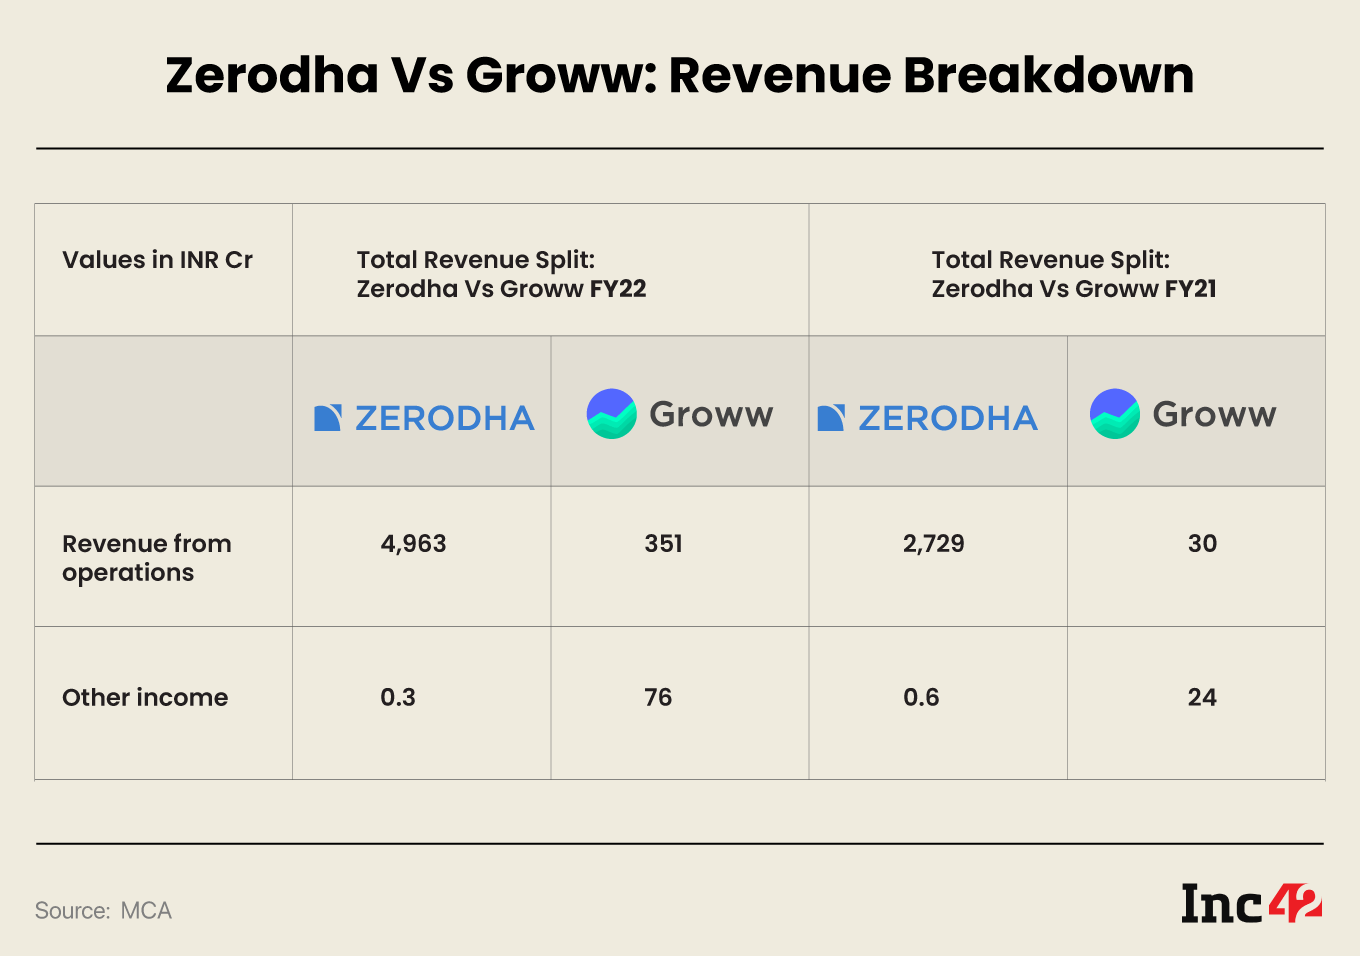 David Vs. Goliath: Is The 6-Year-Old Groww A Potential Threat To Market Leader Zerodha